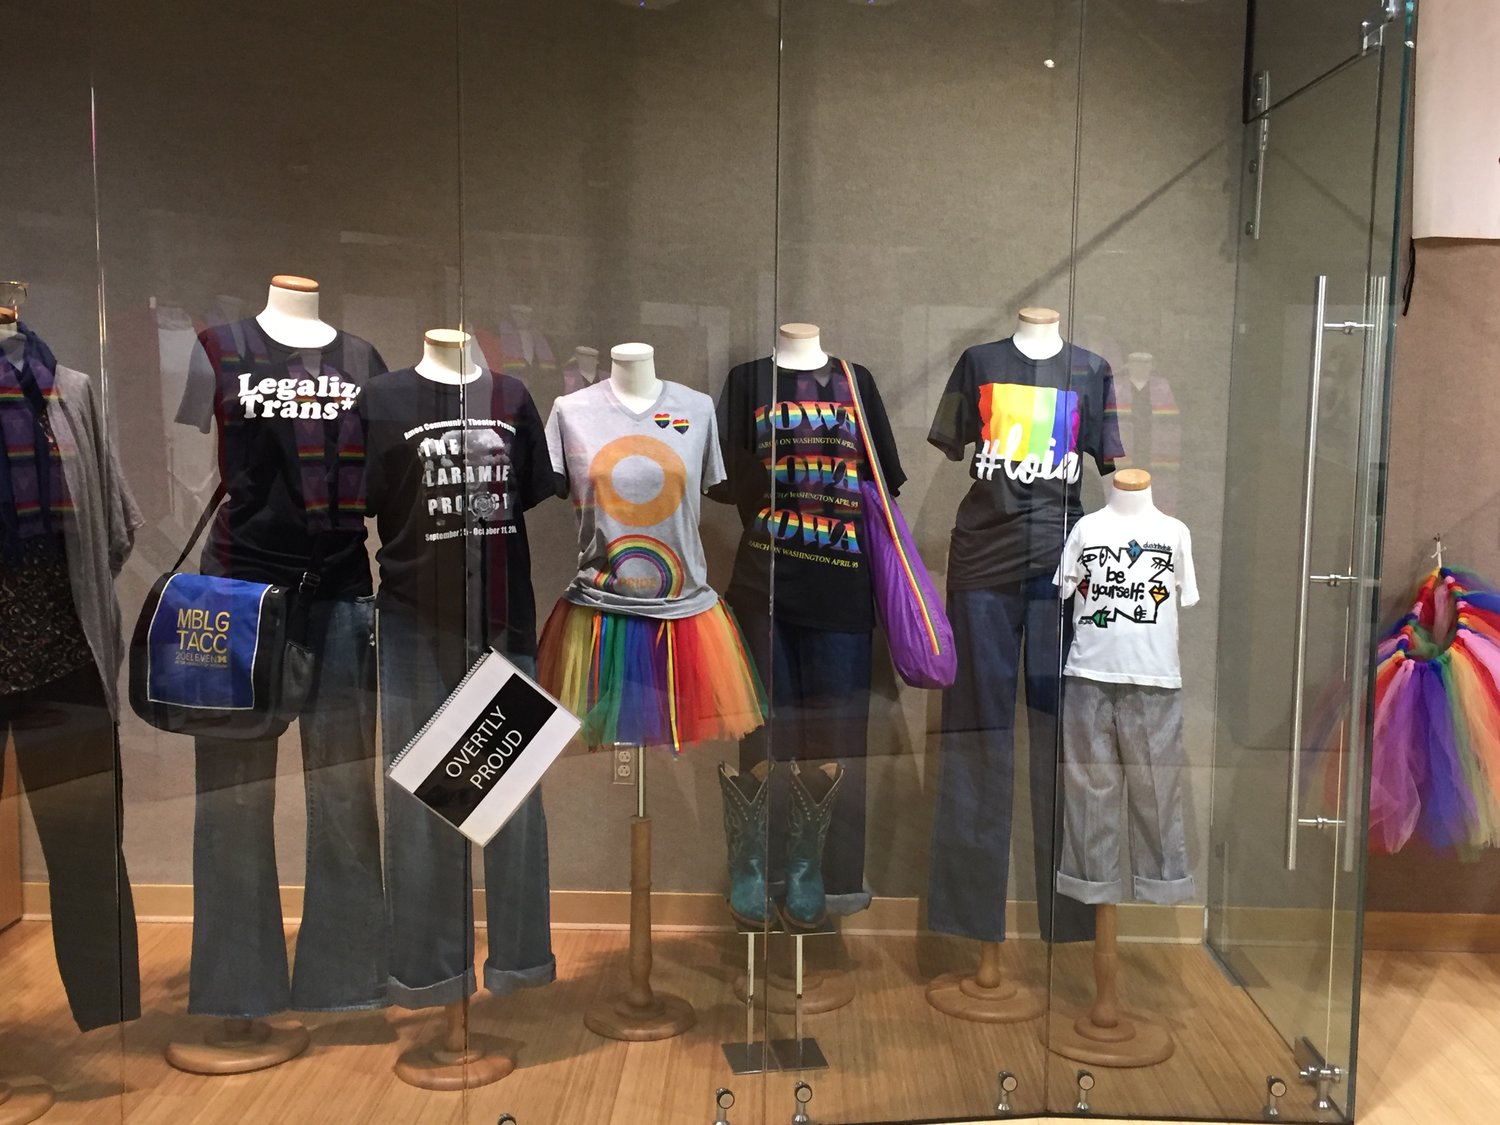 Dress forms displaying "Overtly Proud" outfits in glass exhibition case